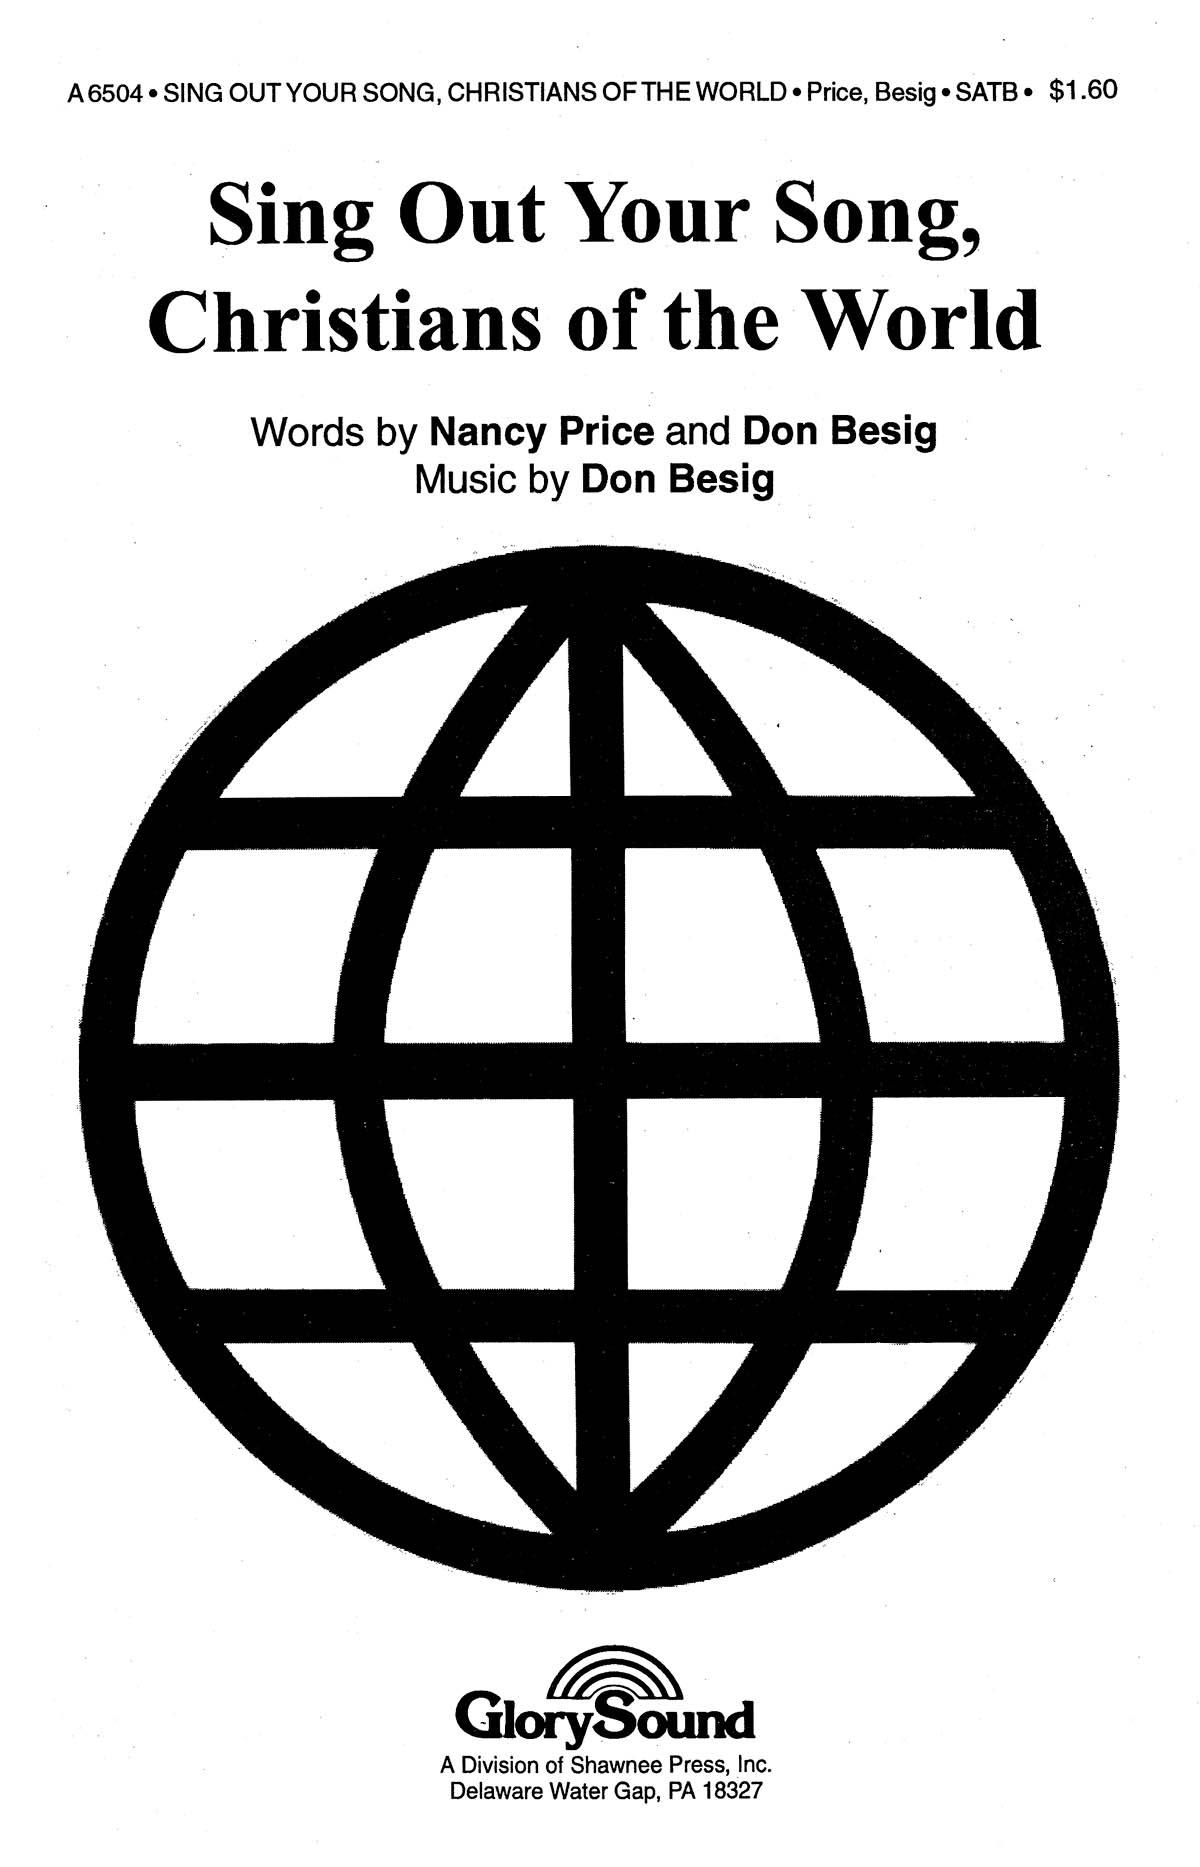 Price: Sing Out Your Song Christians of the World: SATB: Vocal Score